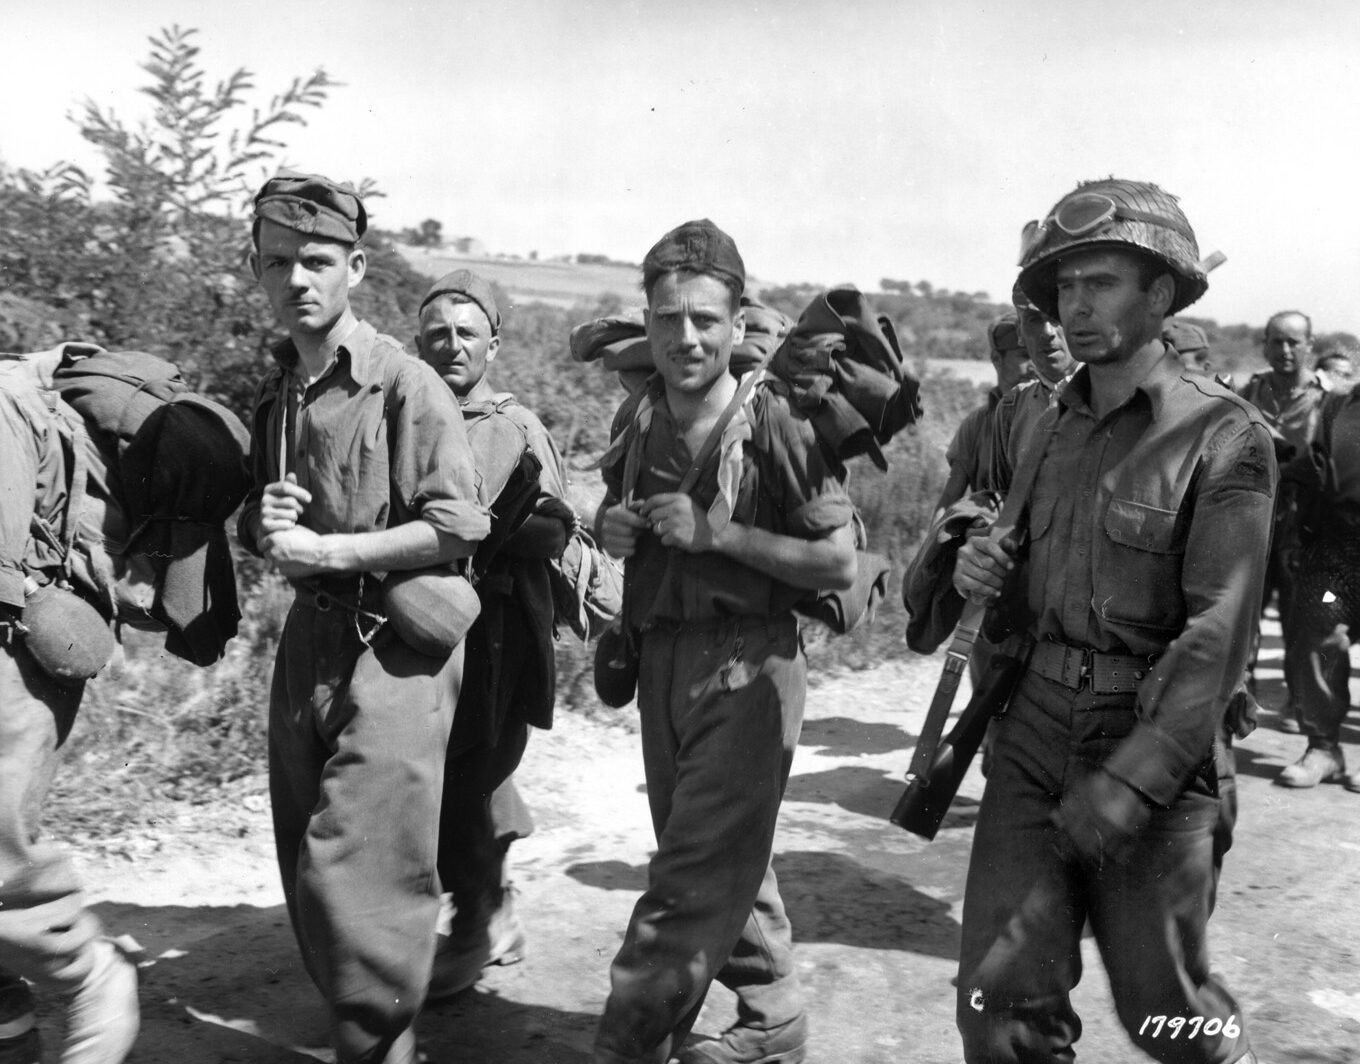 A tanker with the 2nd Armored Division escorts his smiling Italian prisoners to a holding pen.